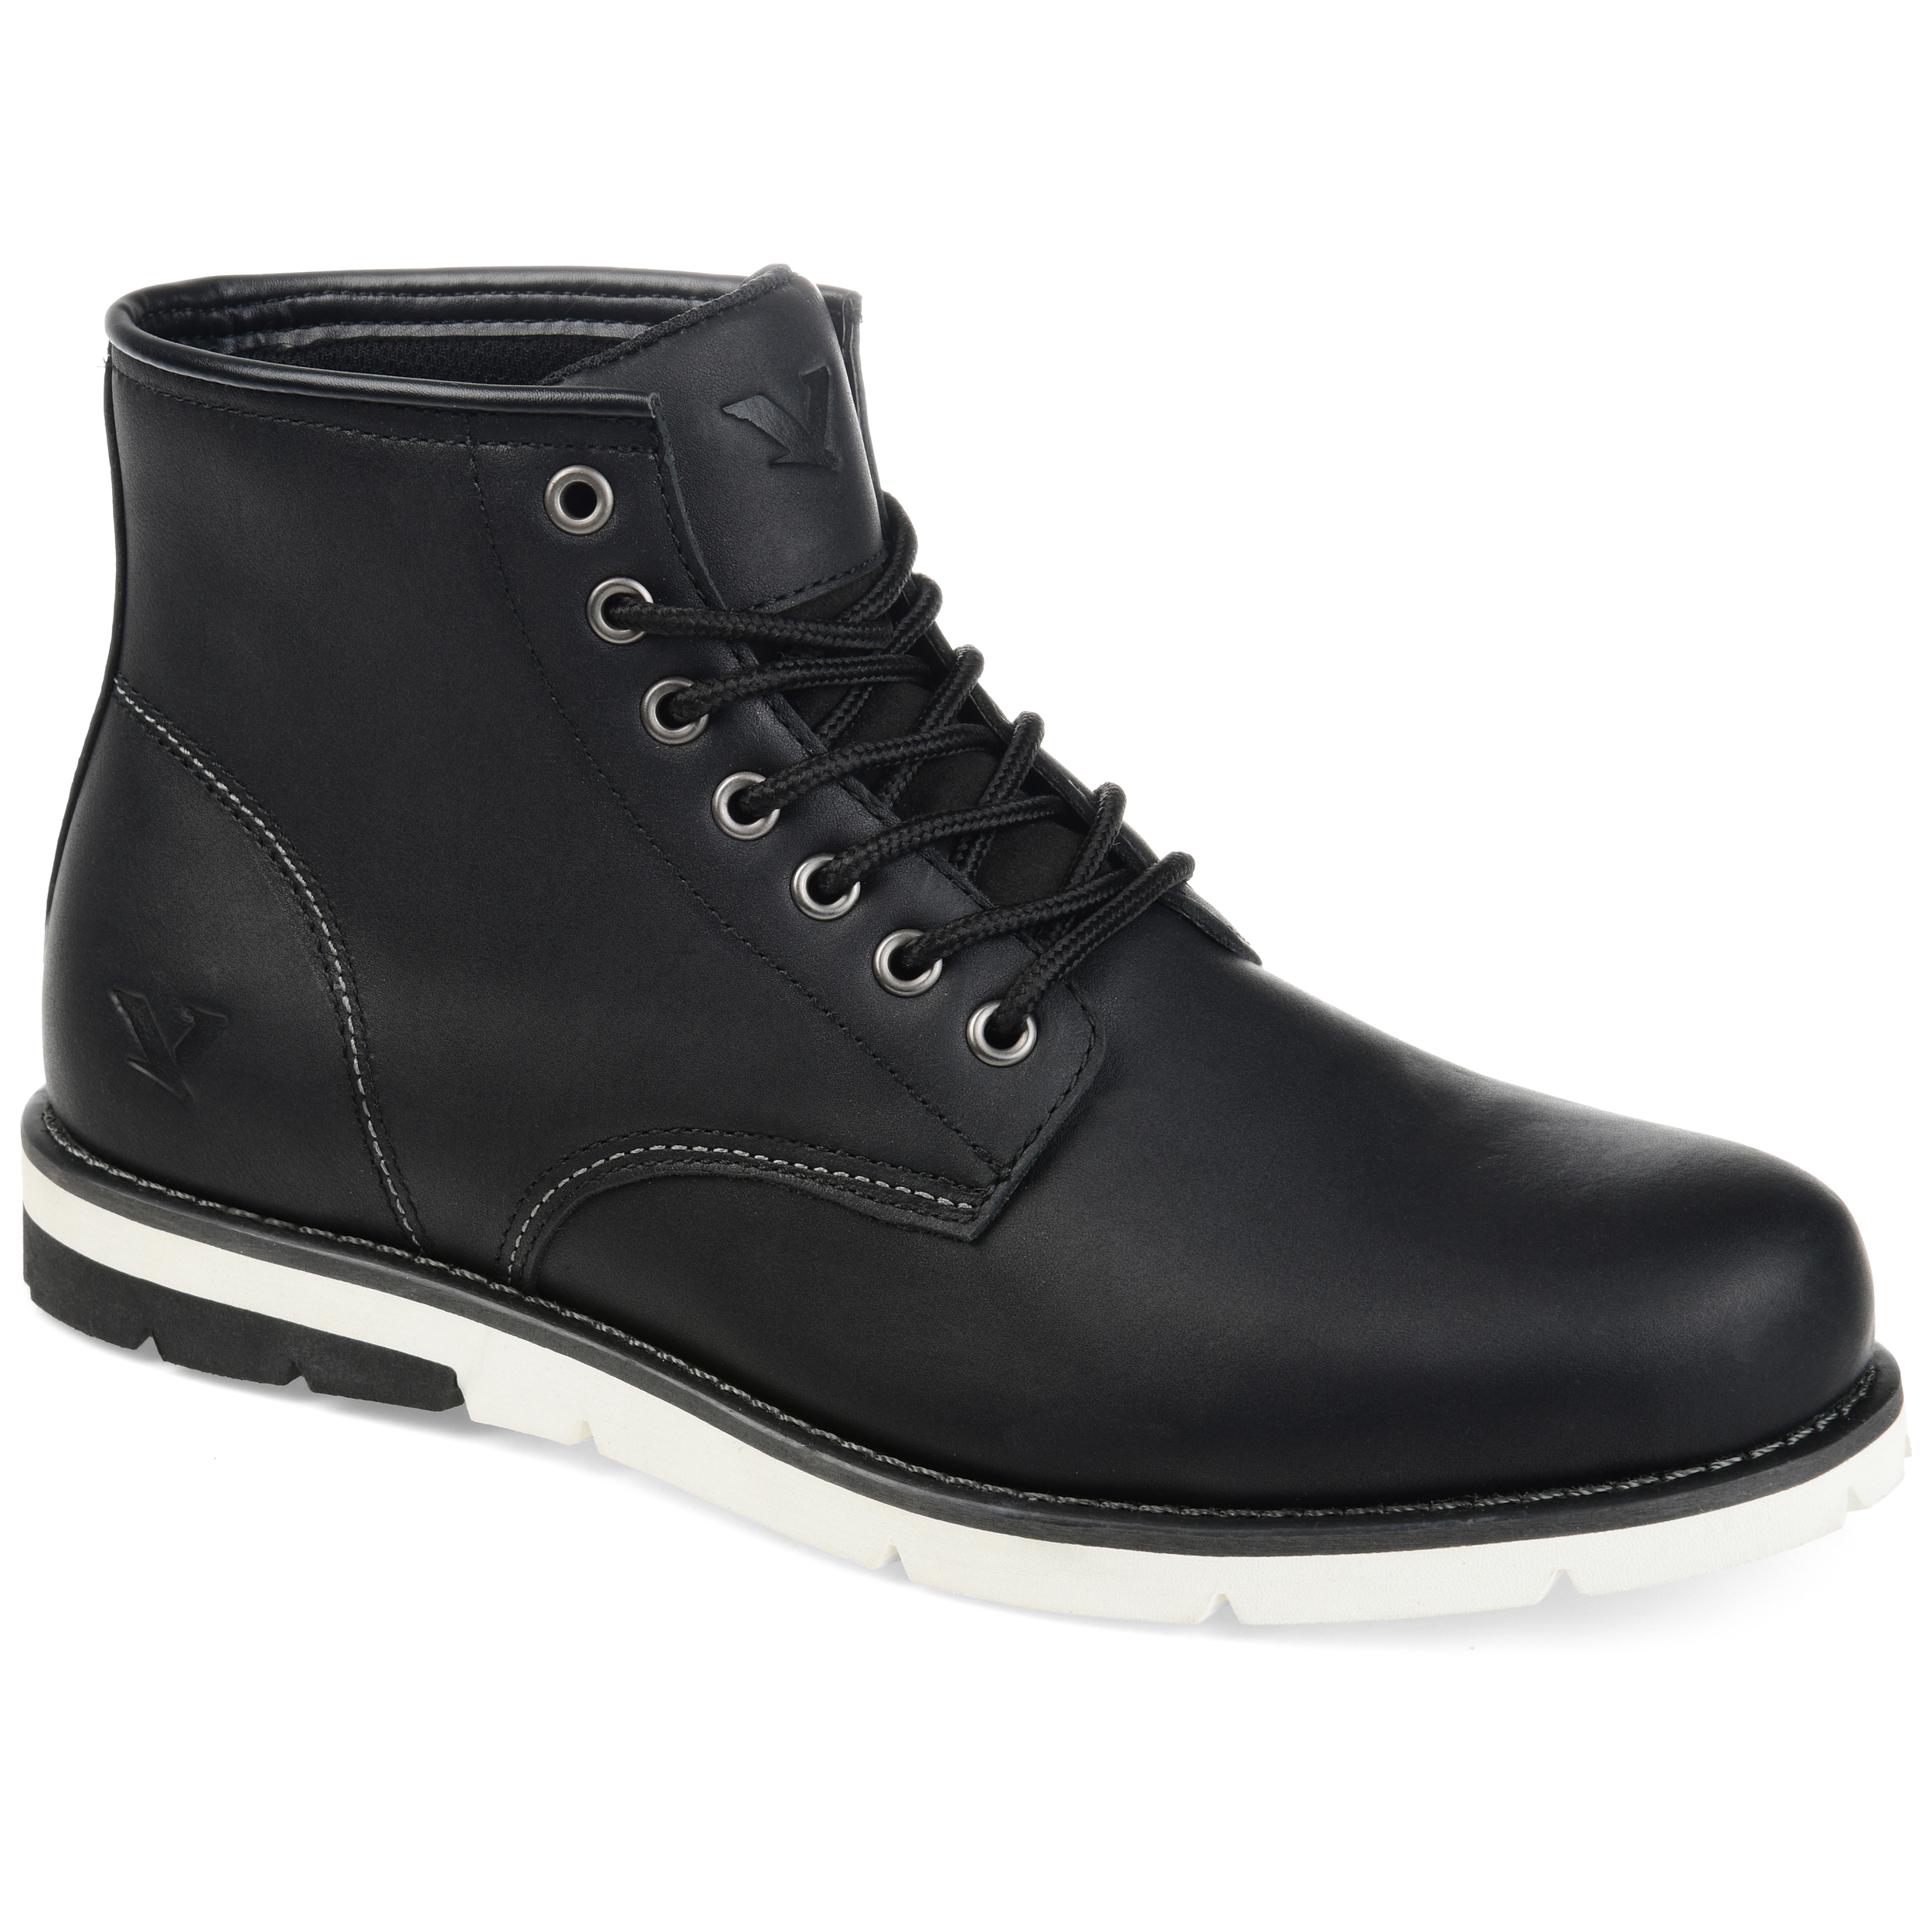 Territory Men's Axel Lace-up Ankle Boot - image 1 of 7